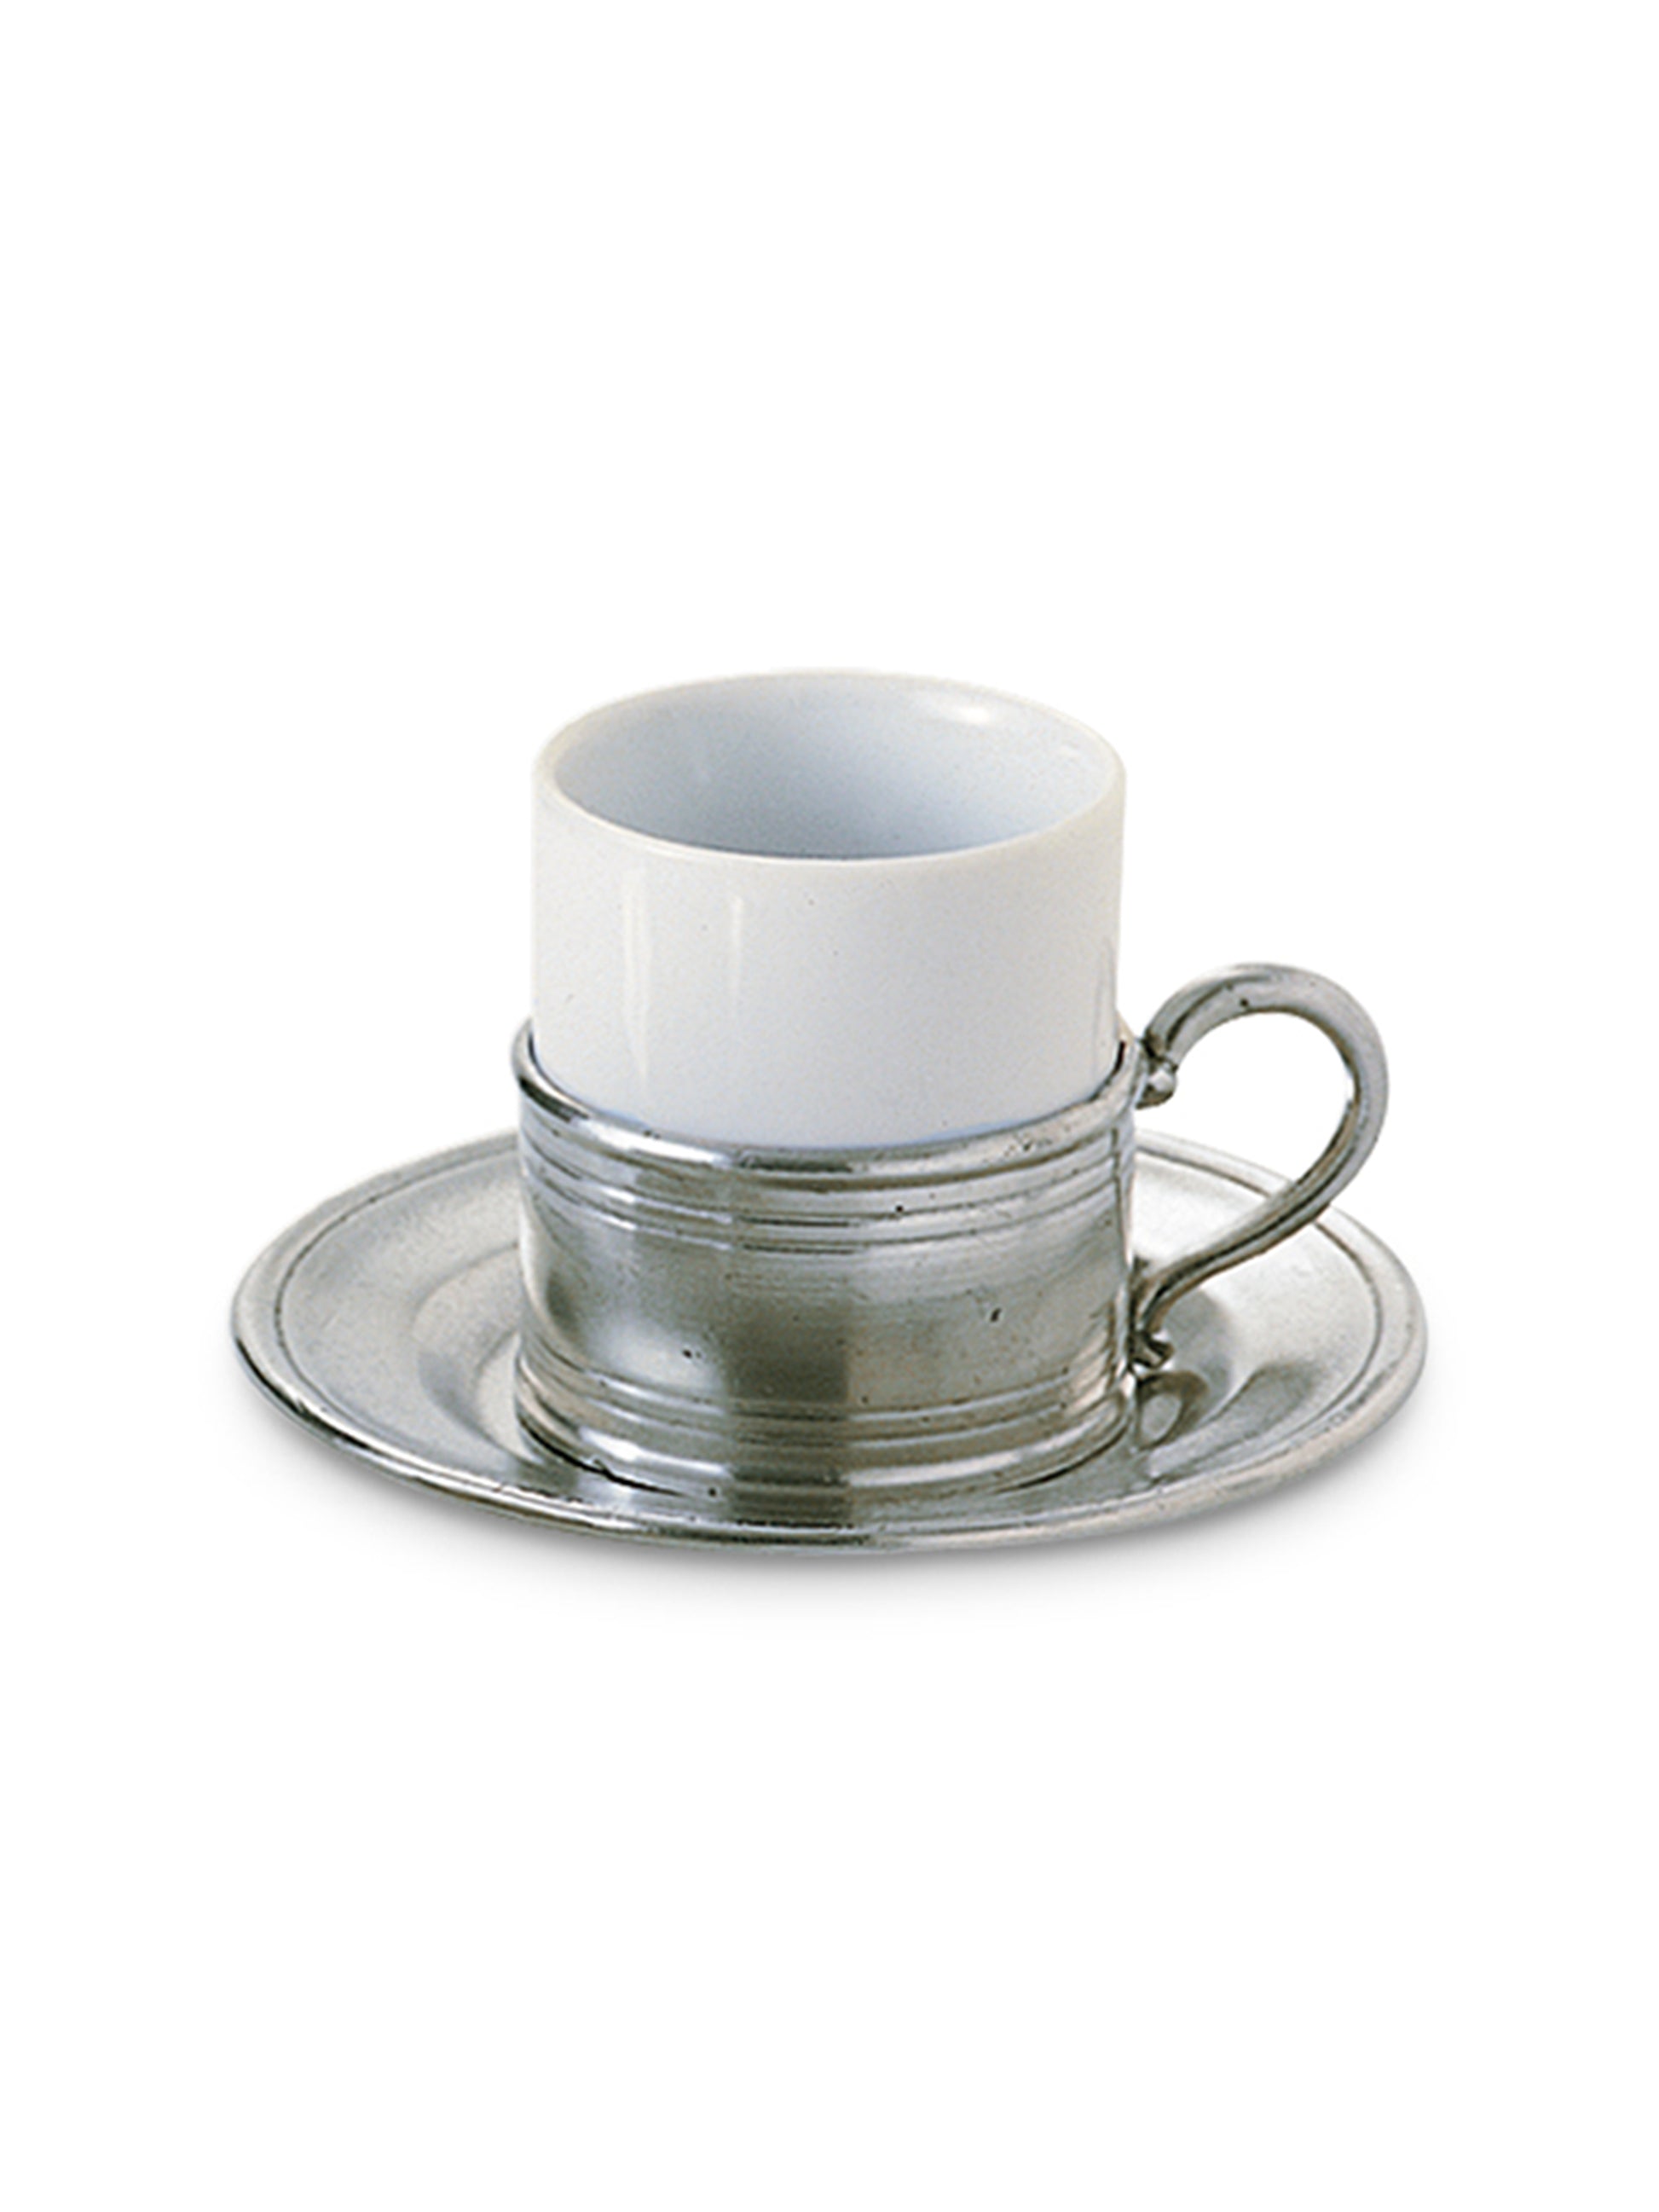 https://westontable.com/cdn/shop/products/MATCH-Pewter-Espresso-Cup-with-Saucer-Weston-Table.jpg?v=1591612414&width=1946